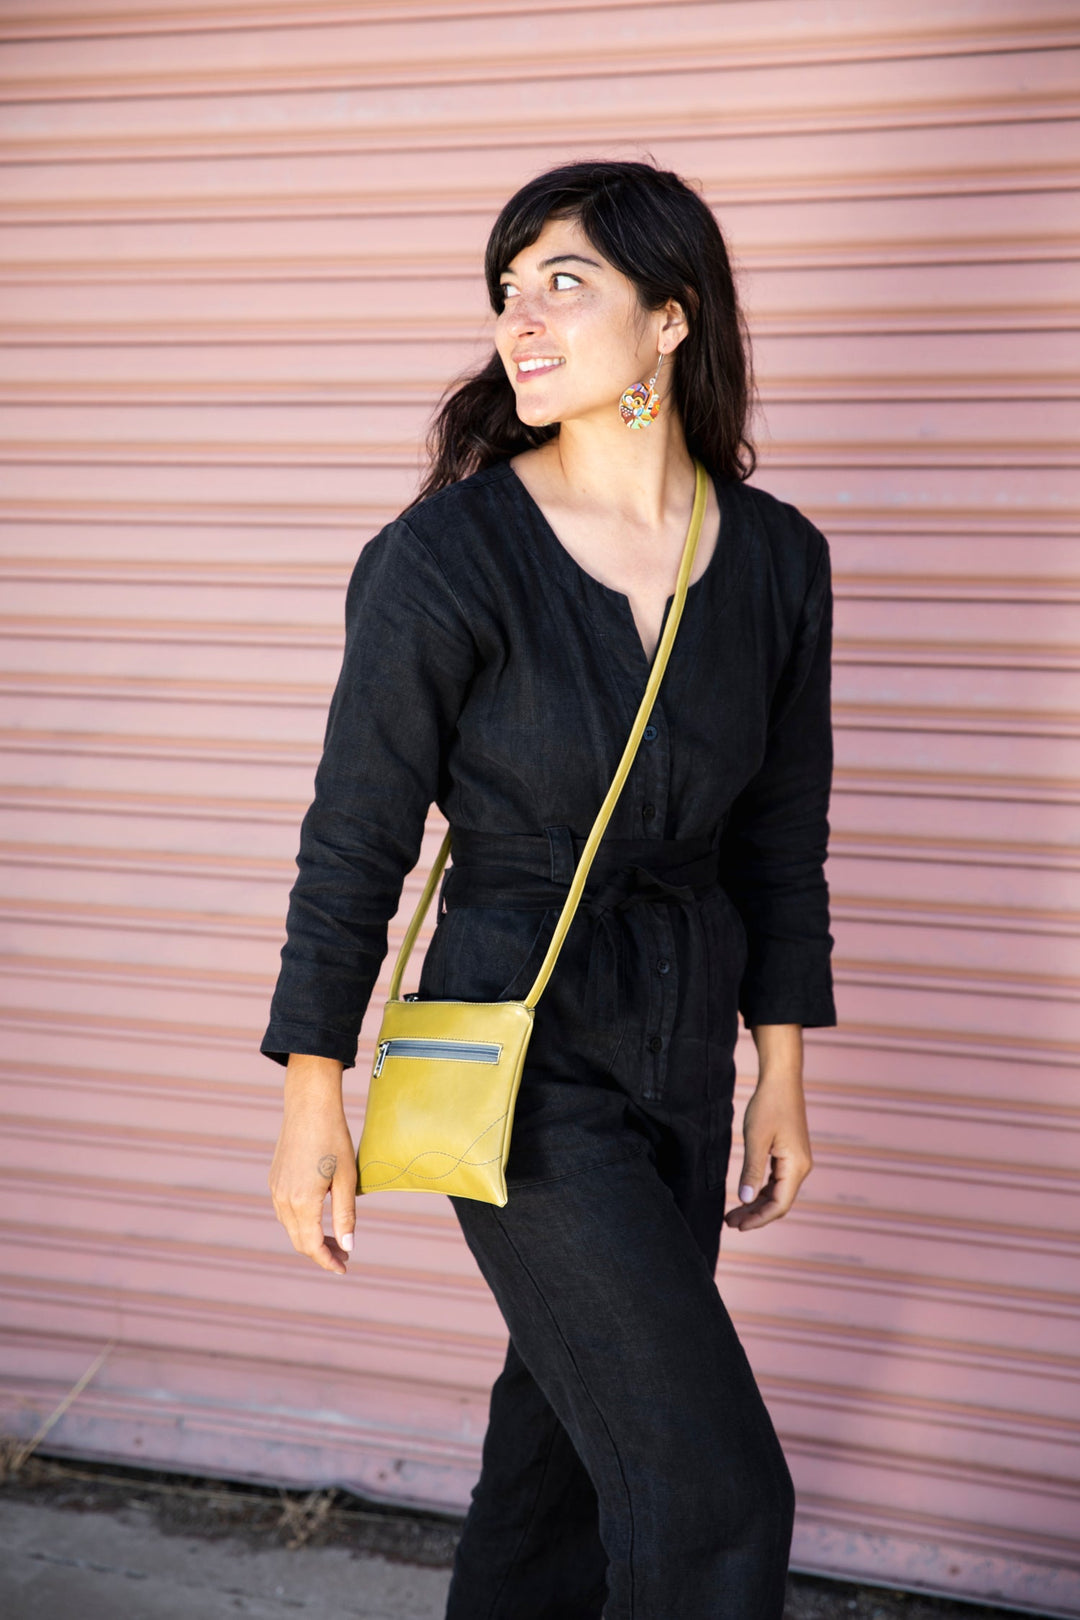 Cha Cha Small Crossbody Bag from Glazed Vegan Leather made in USA#color_citrine